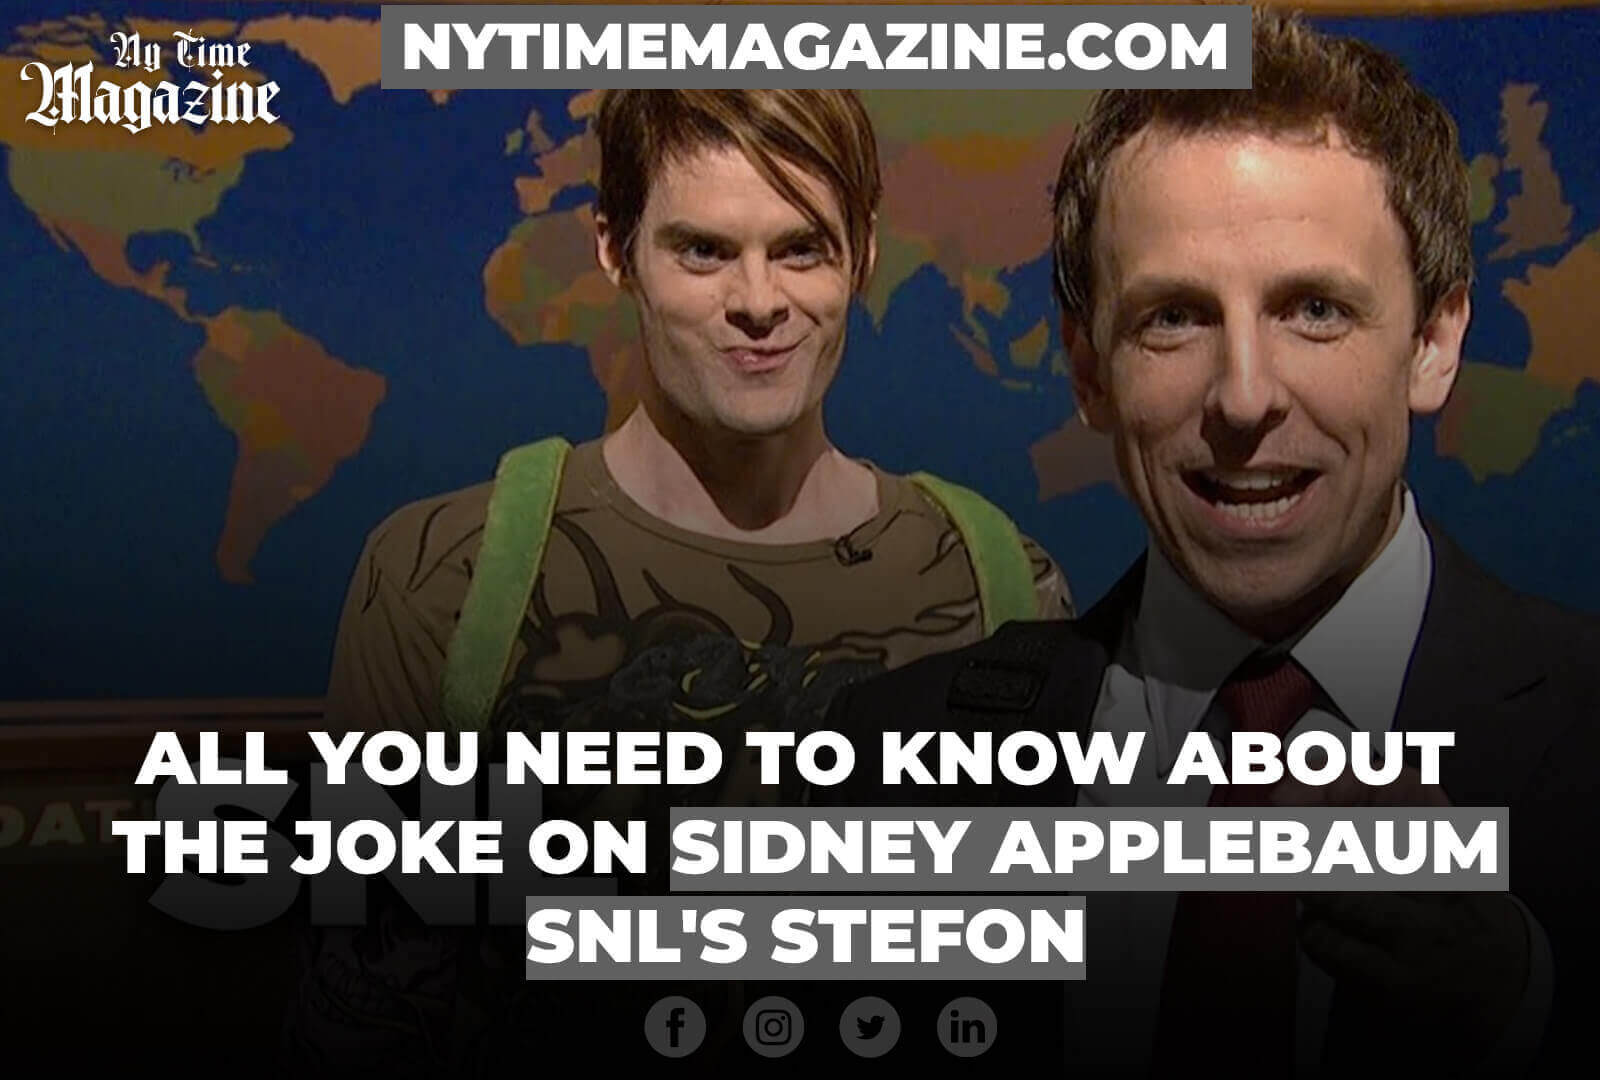 ALL YOU NEED TO KNOW ABOUT THE JOKE ON SIDNEY APPLEBAUM AND SNL'S STEFON